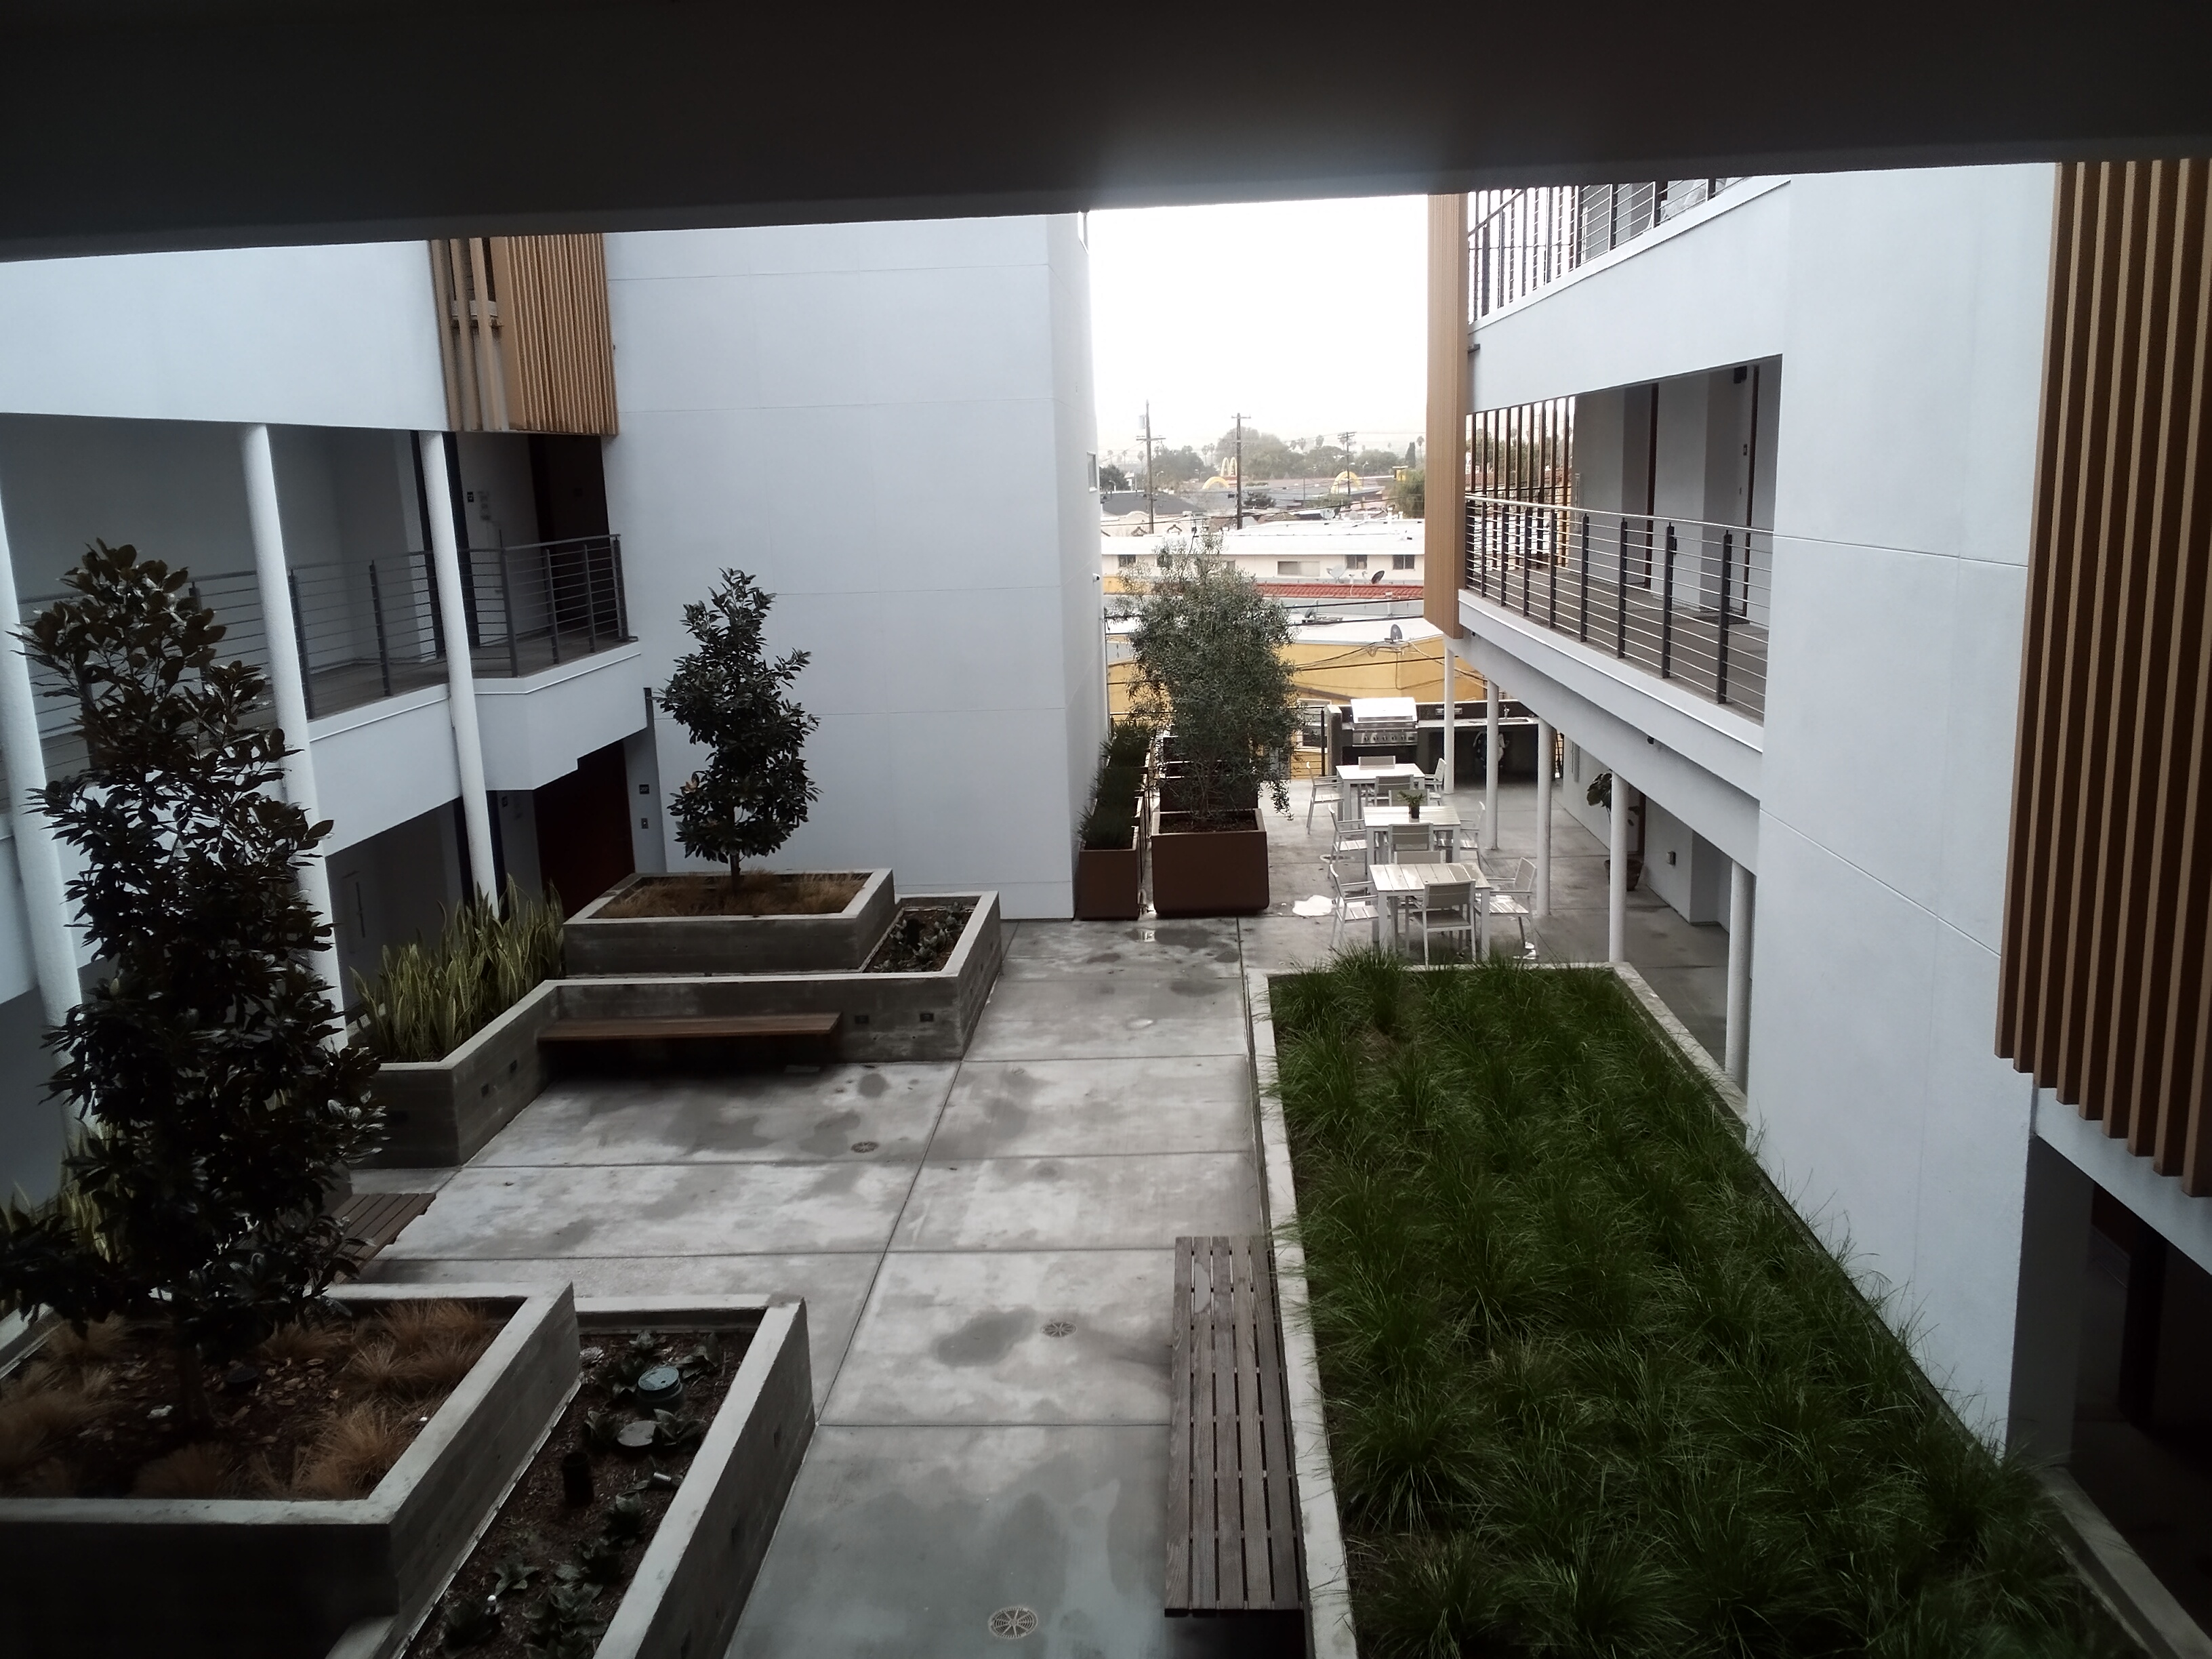 Top View of courtyard. Planters on the perimeter with brown benches. At the far end there are three tables with chairs beside a grill.